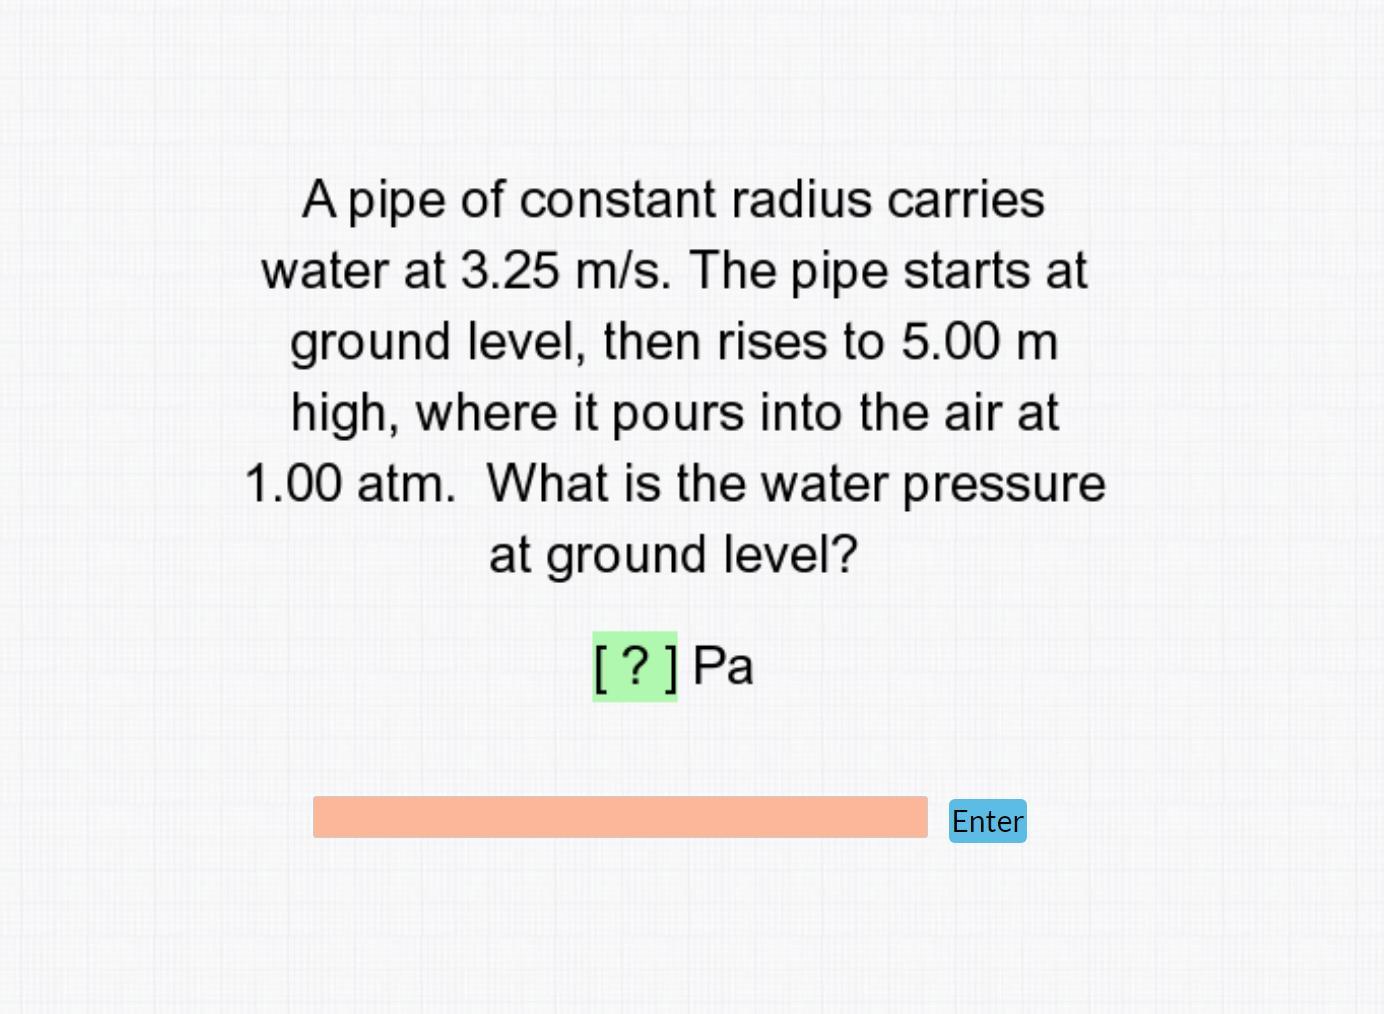 A Pipe Of Constant Radius Carried Water At 3.25 M/s. Please Answer In PA.